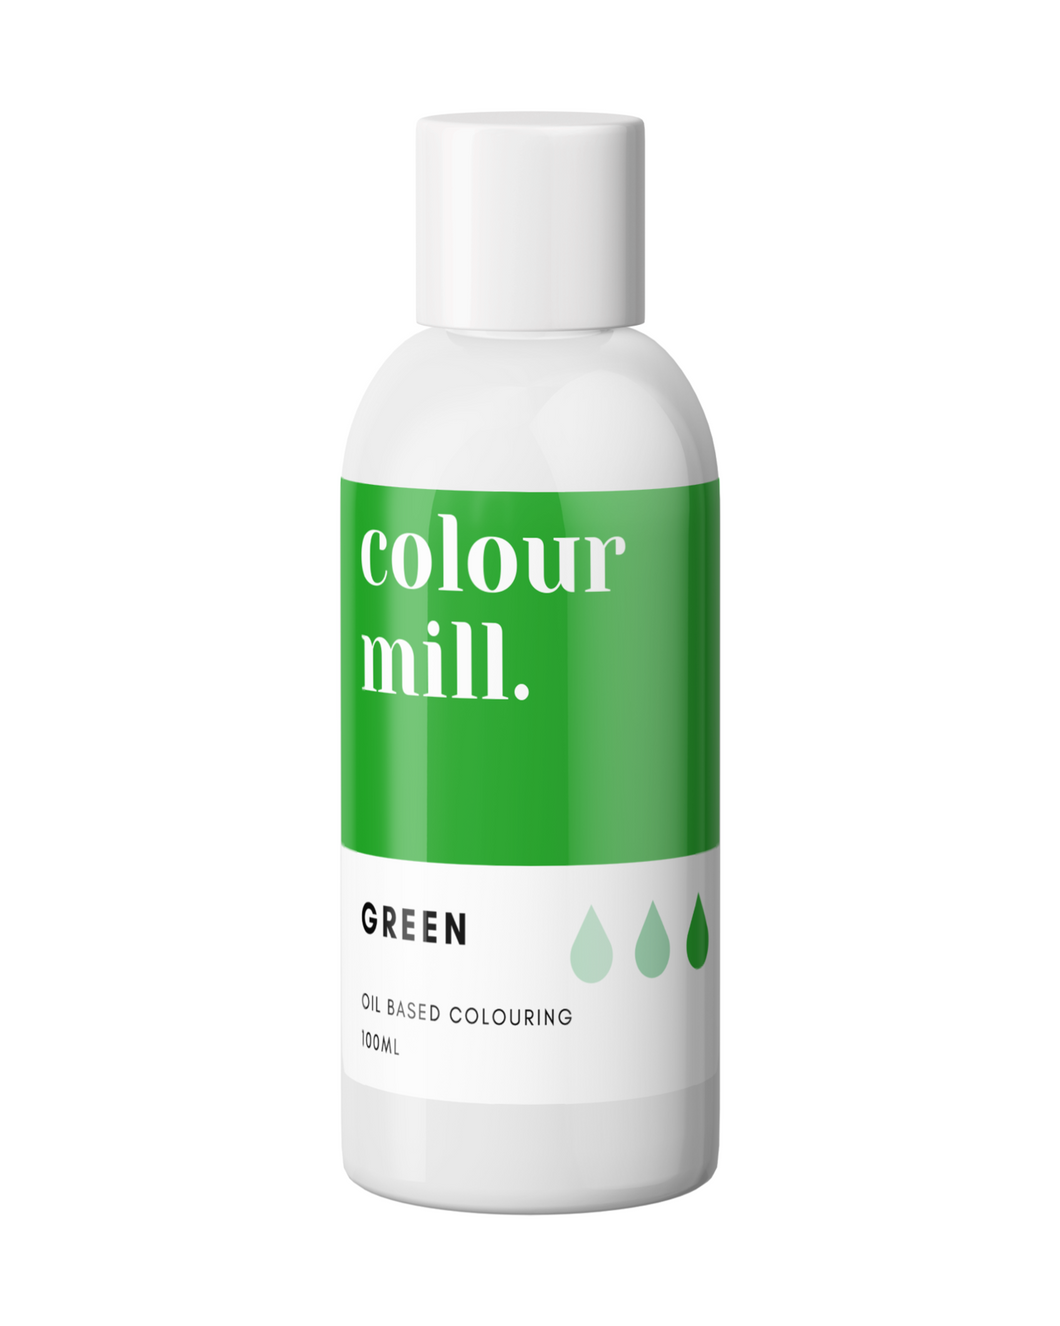 Oil Based Coloring (100ml) Green